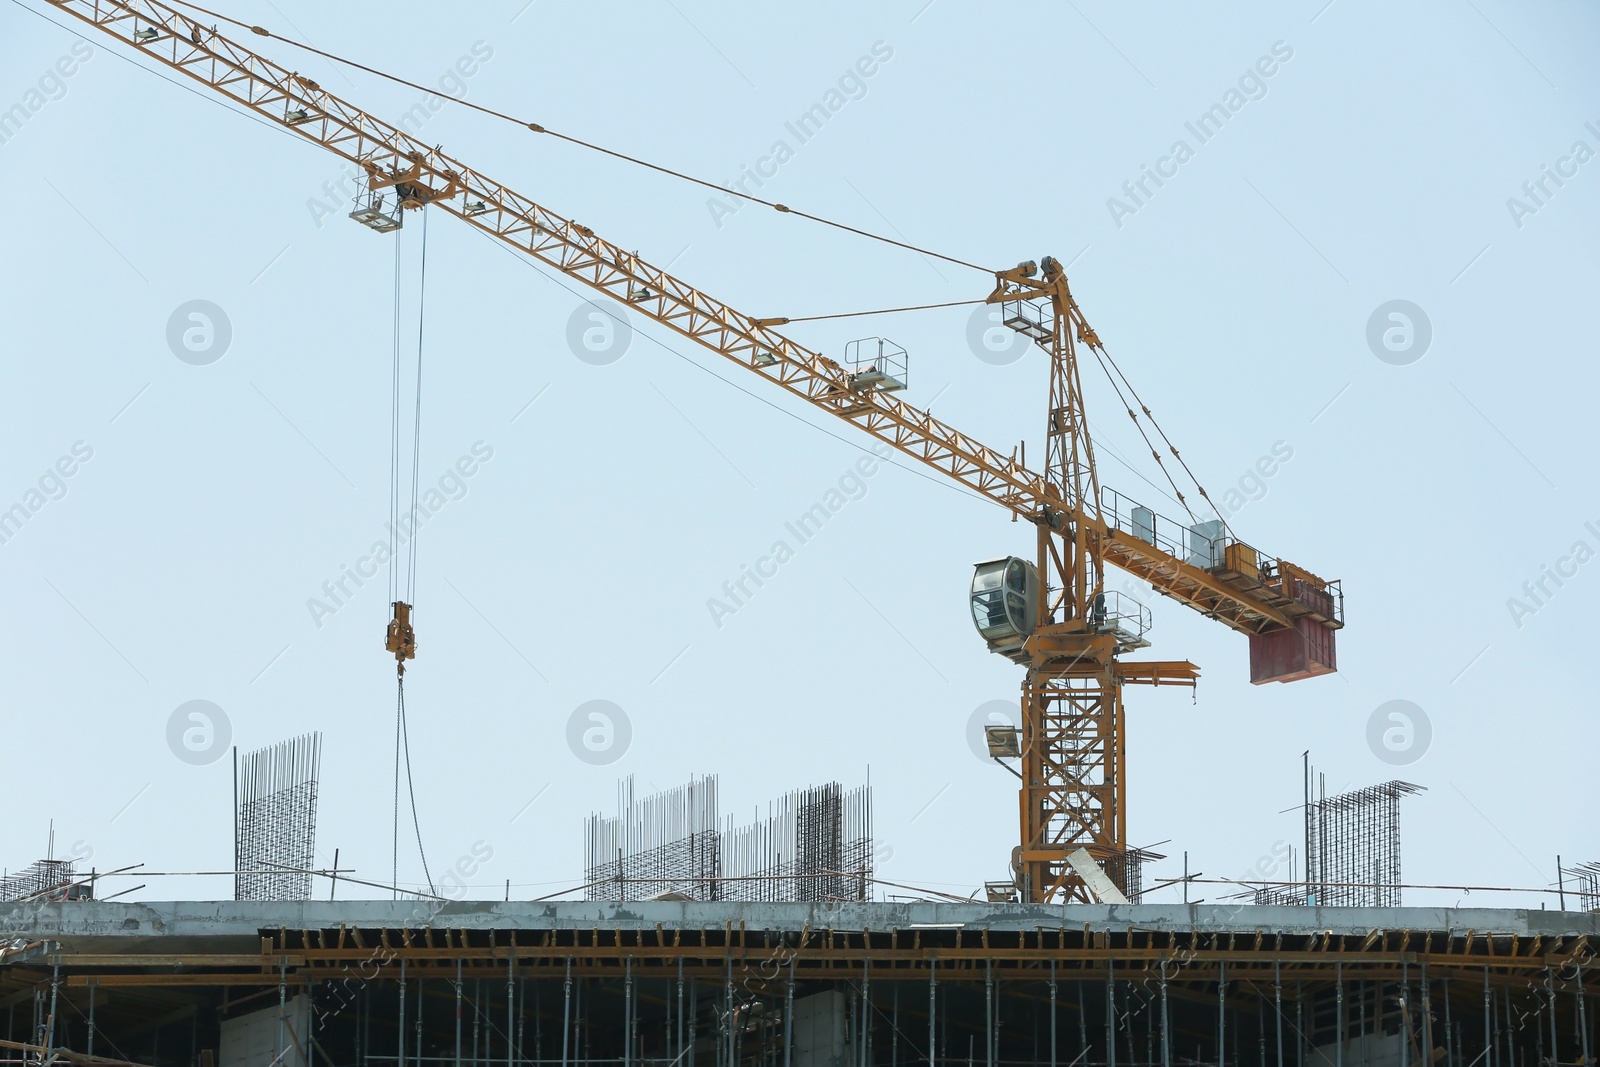 Photo of Construction crane and unfinished building, outdoors